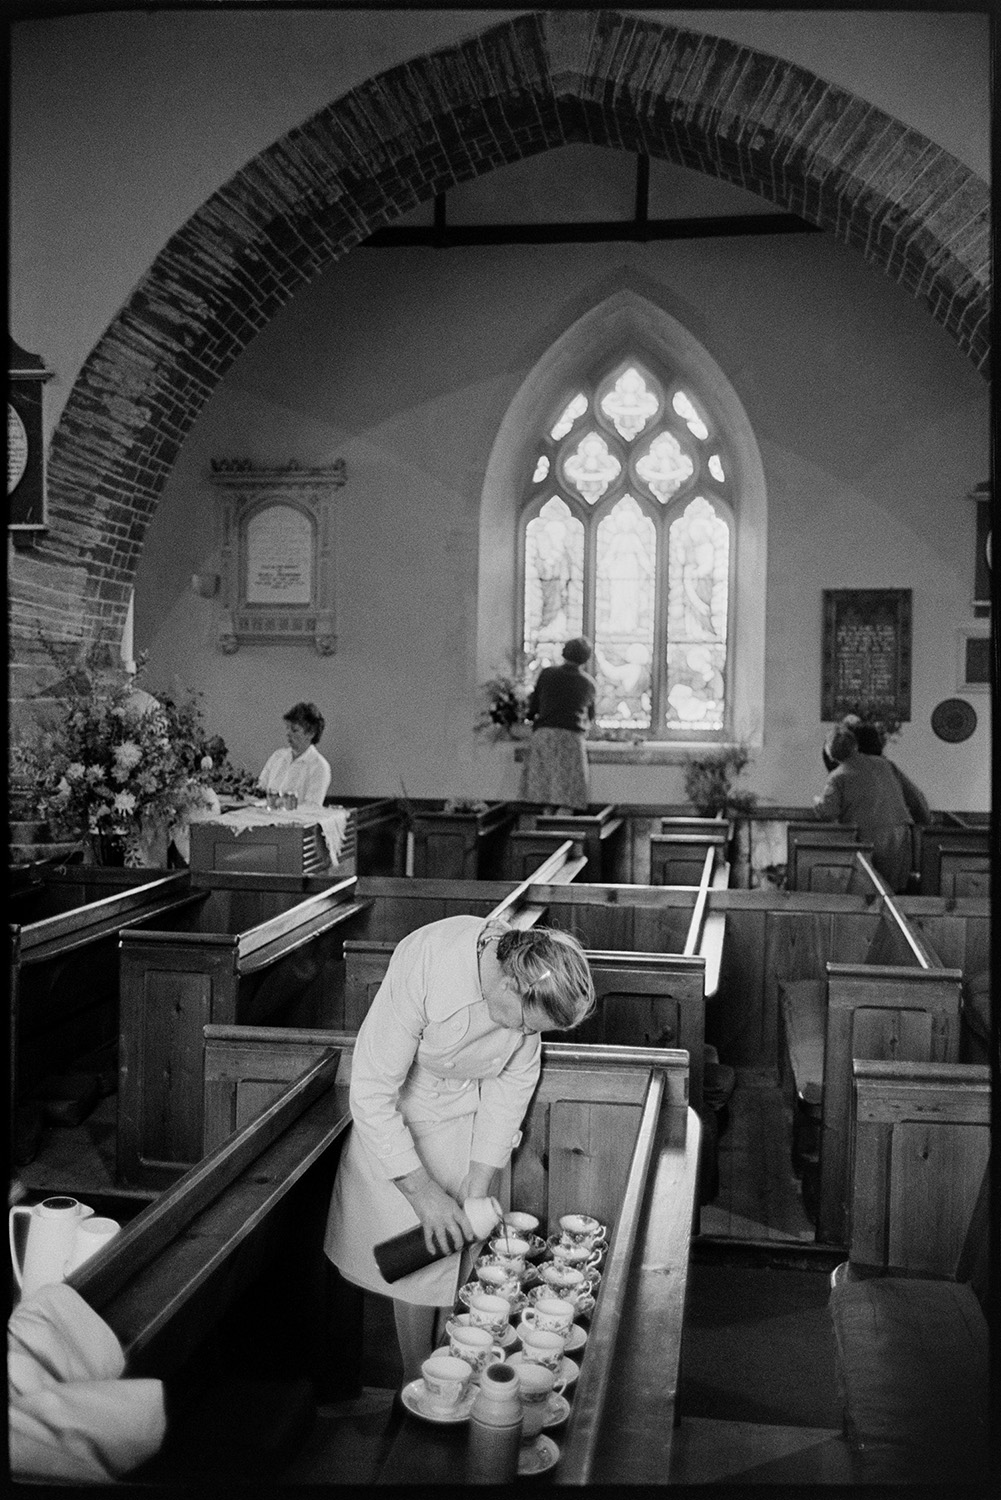 People decorating church for Harvest Festival.
[A woman pouring drinks from a flask into cups laid out on a pew, for the others who are decorating Dolton Church for the Harvest Festival with flower arrangements.]